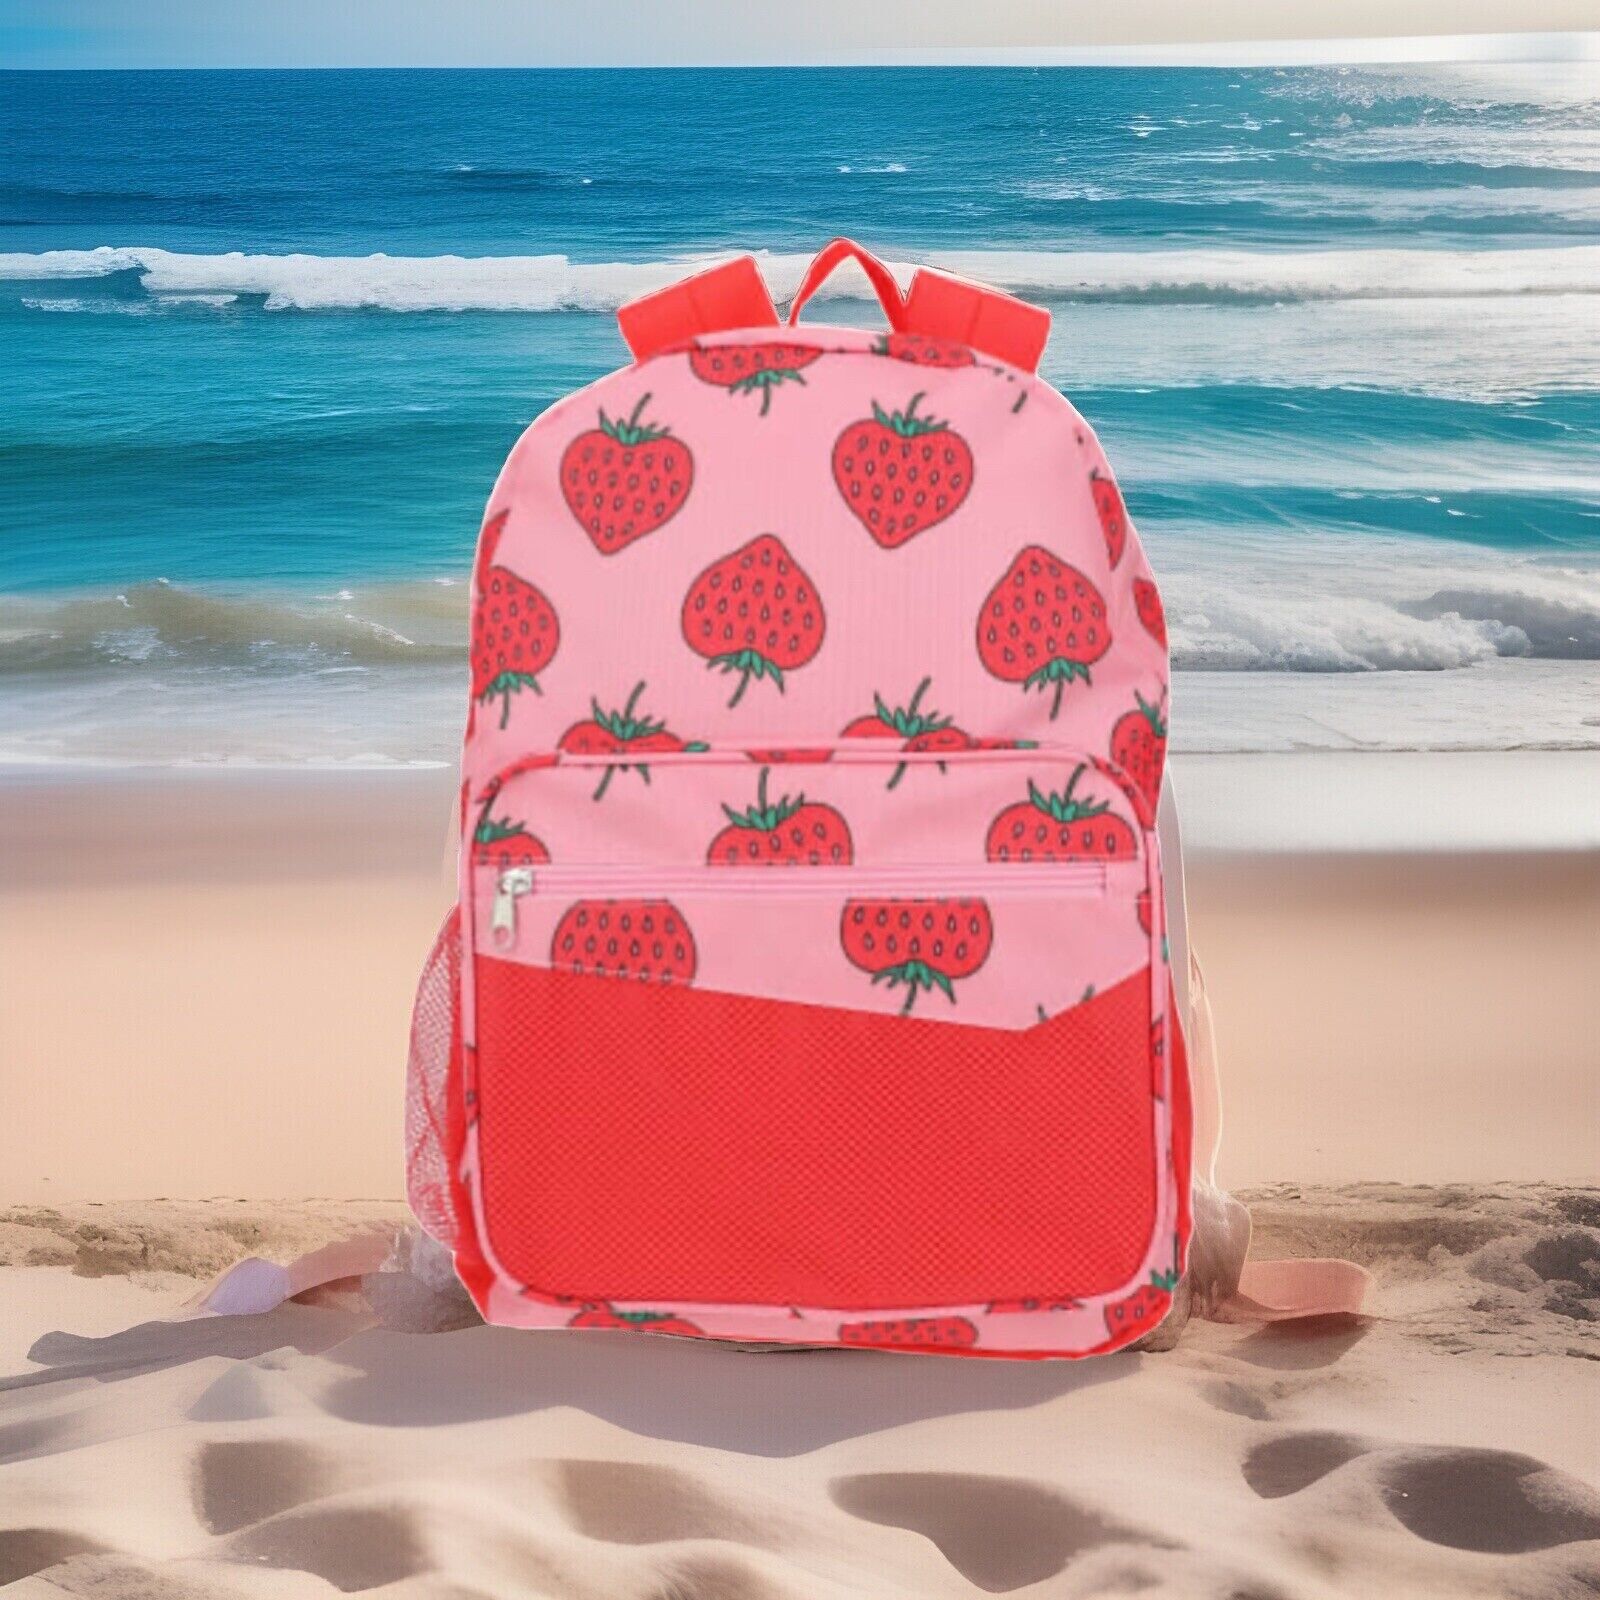 🍓CUTE STRAWBERRY PATTERN BACKPACK BOOK BAG W/MESH FRONT-POCKET 16” Brand New 🍓